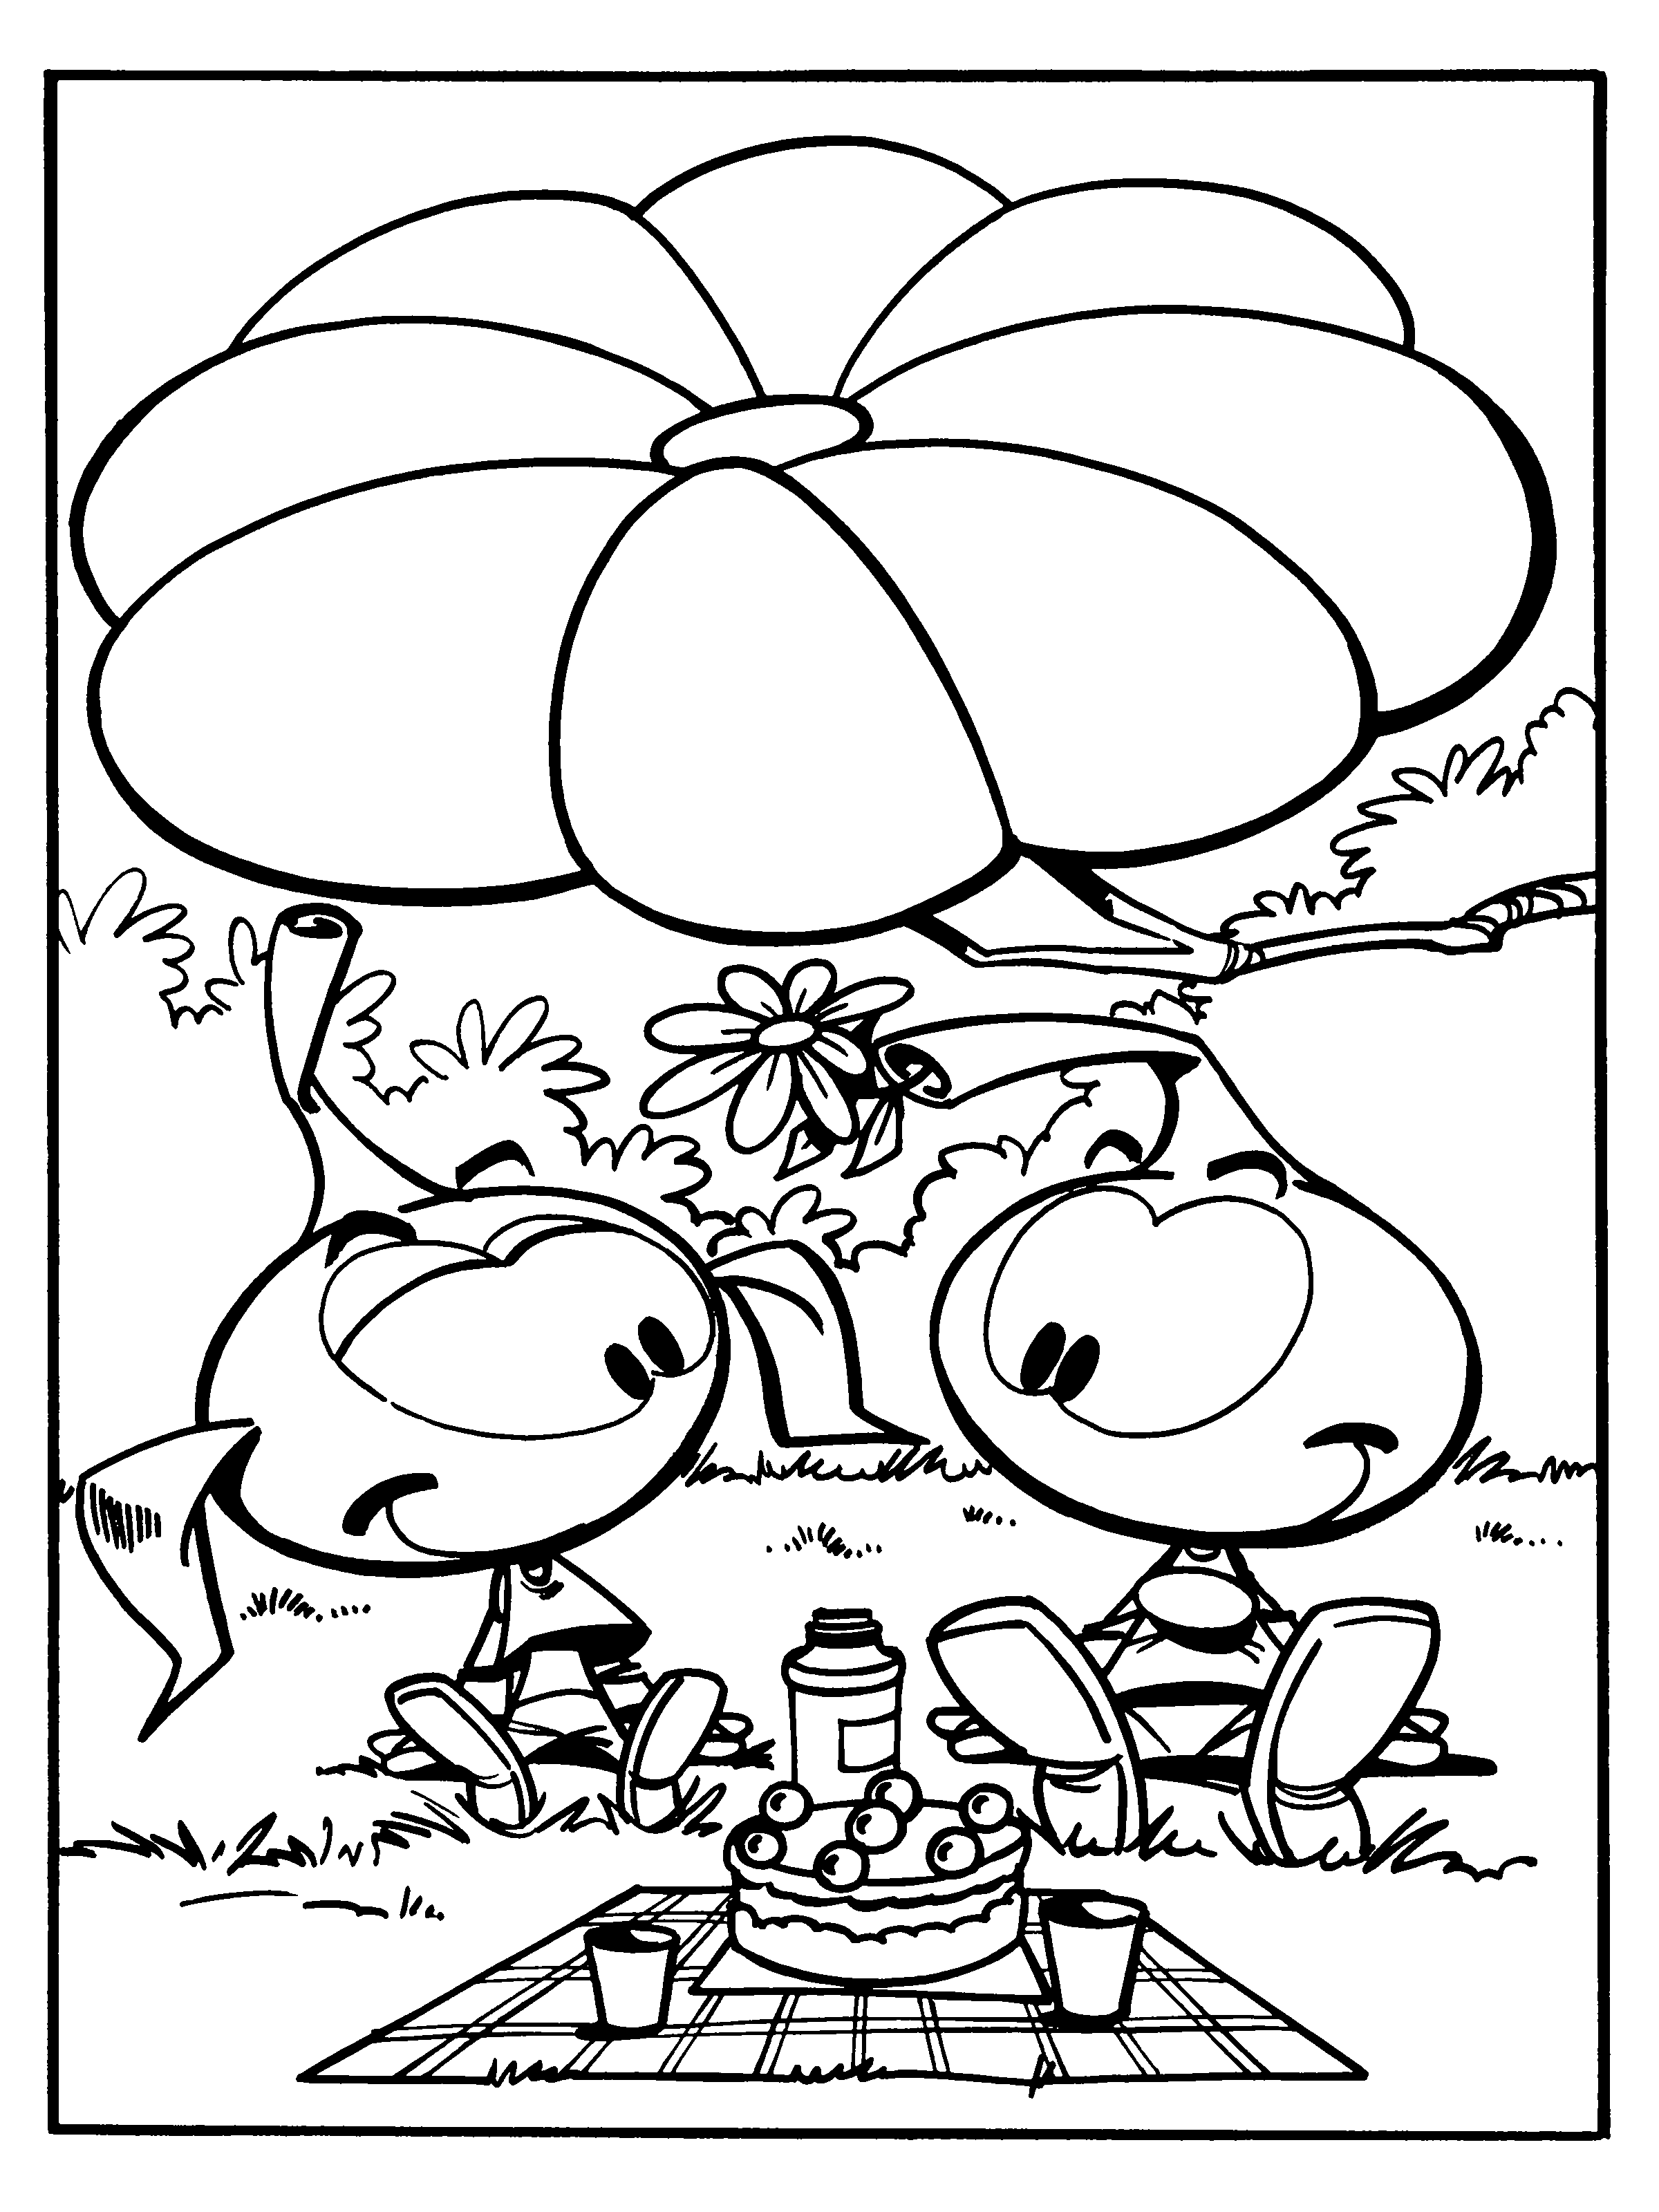 Snorks coloring pages